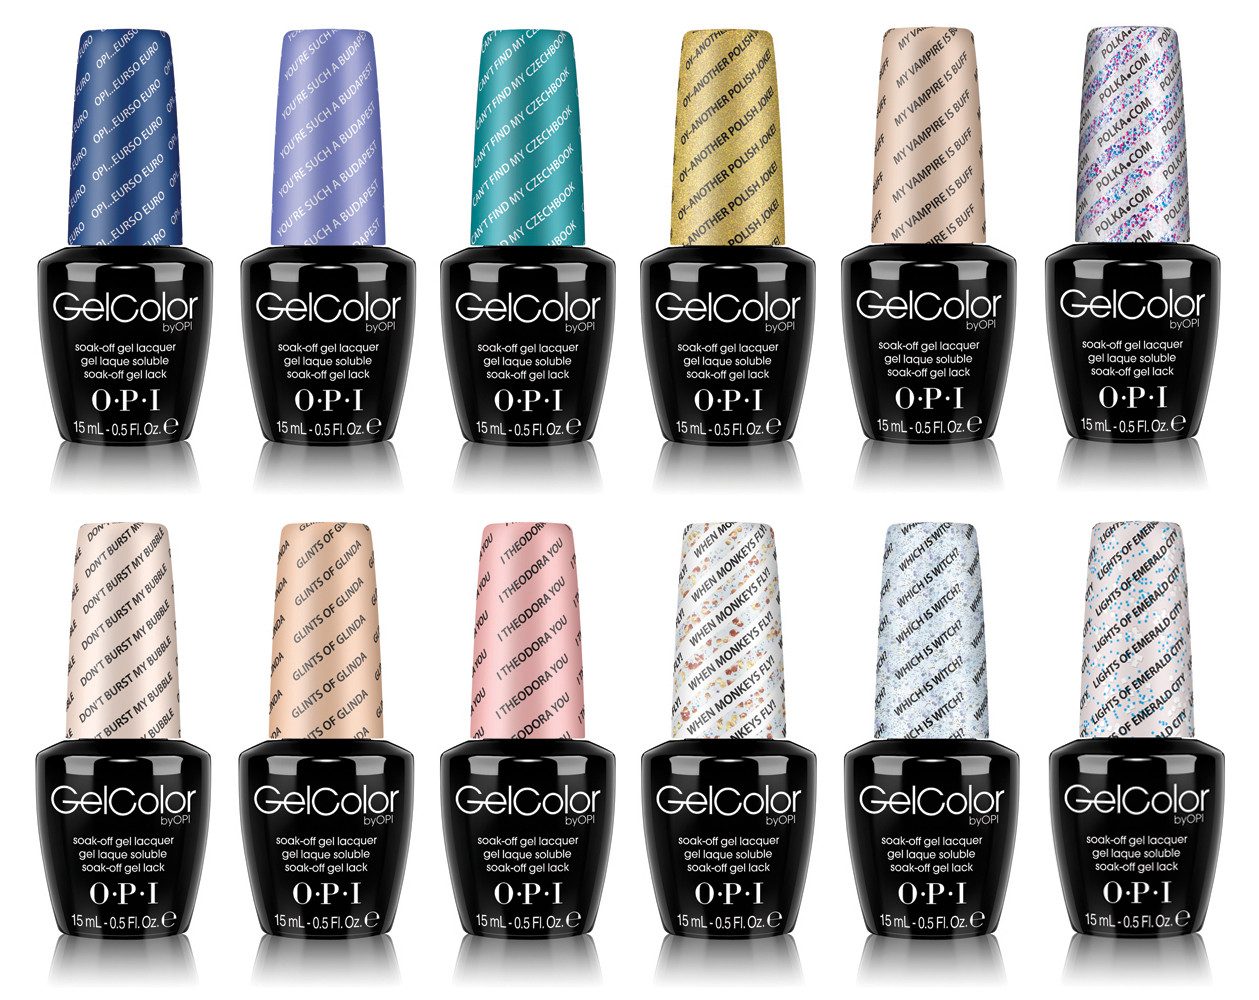 OPI GelColor - New Shellac Colors - wide 3